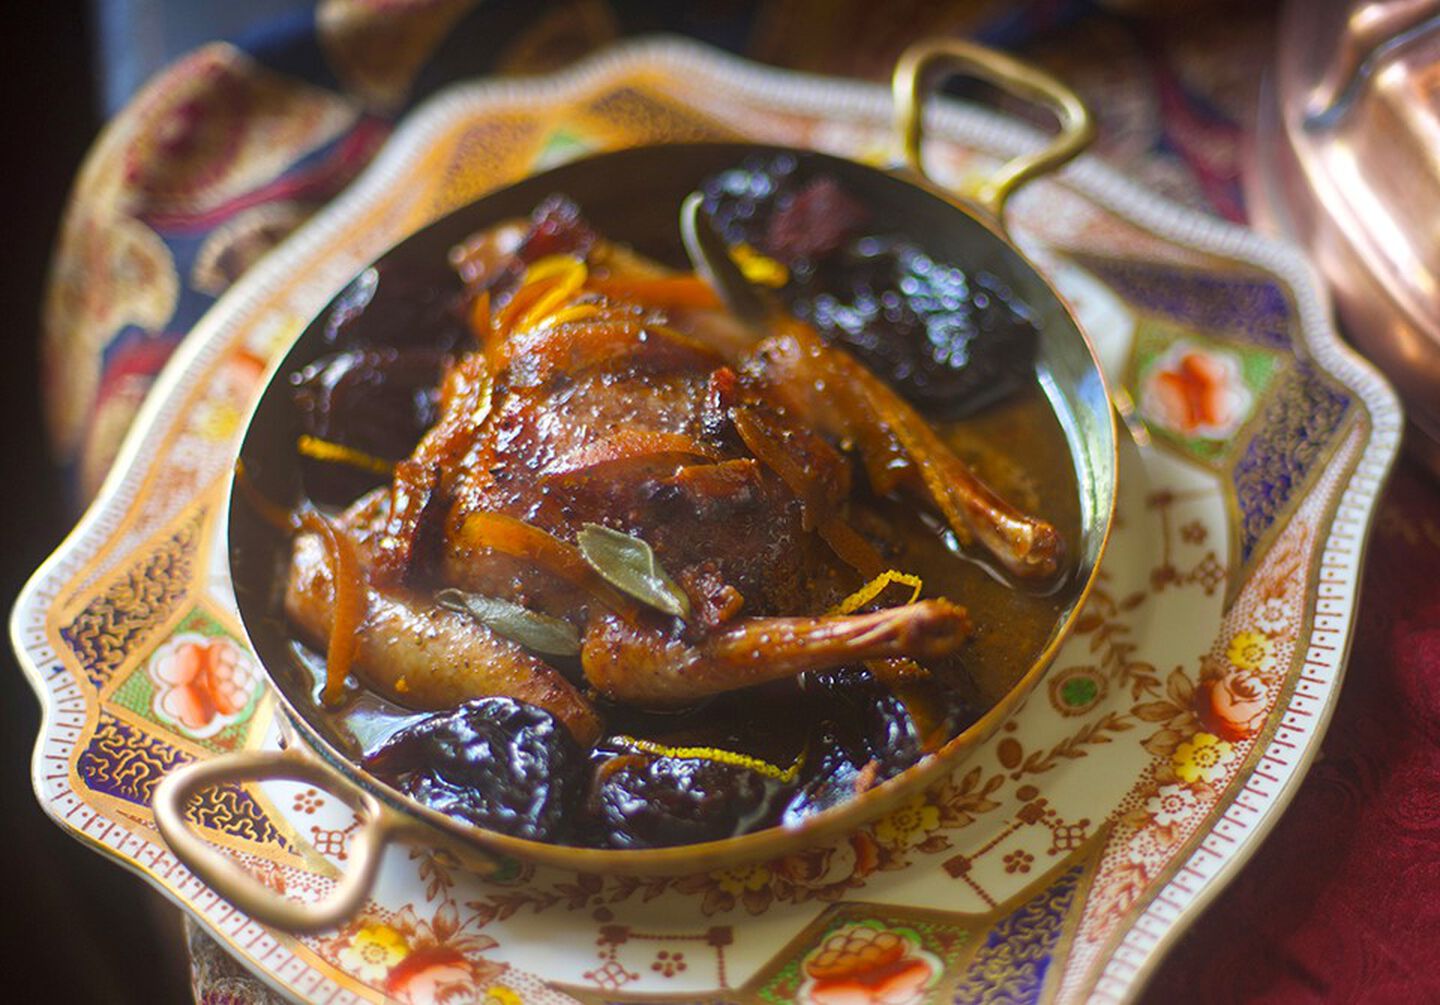 Squab and Prunes with Sherried Orange Sauce